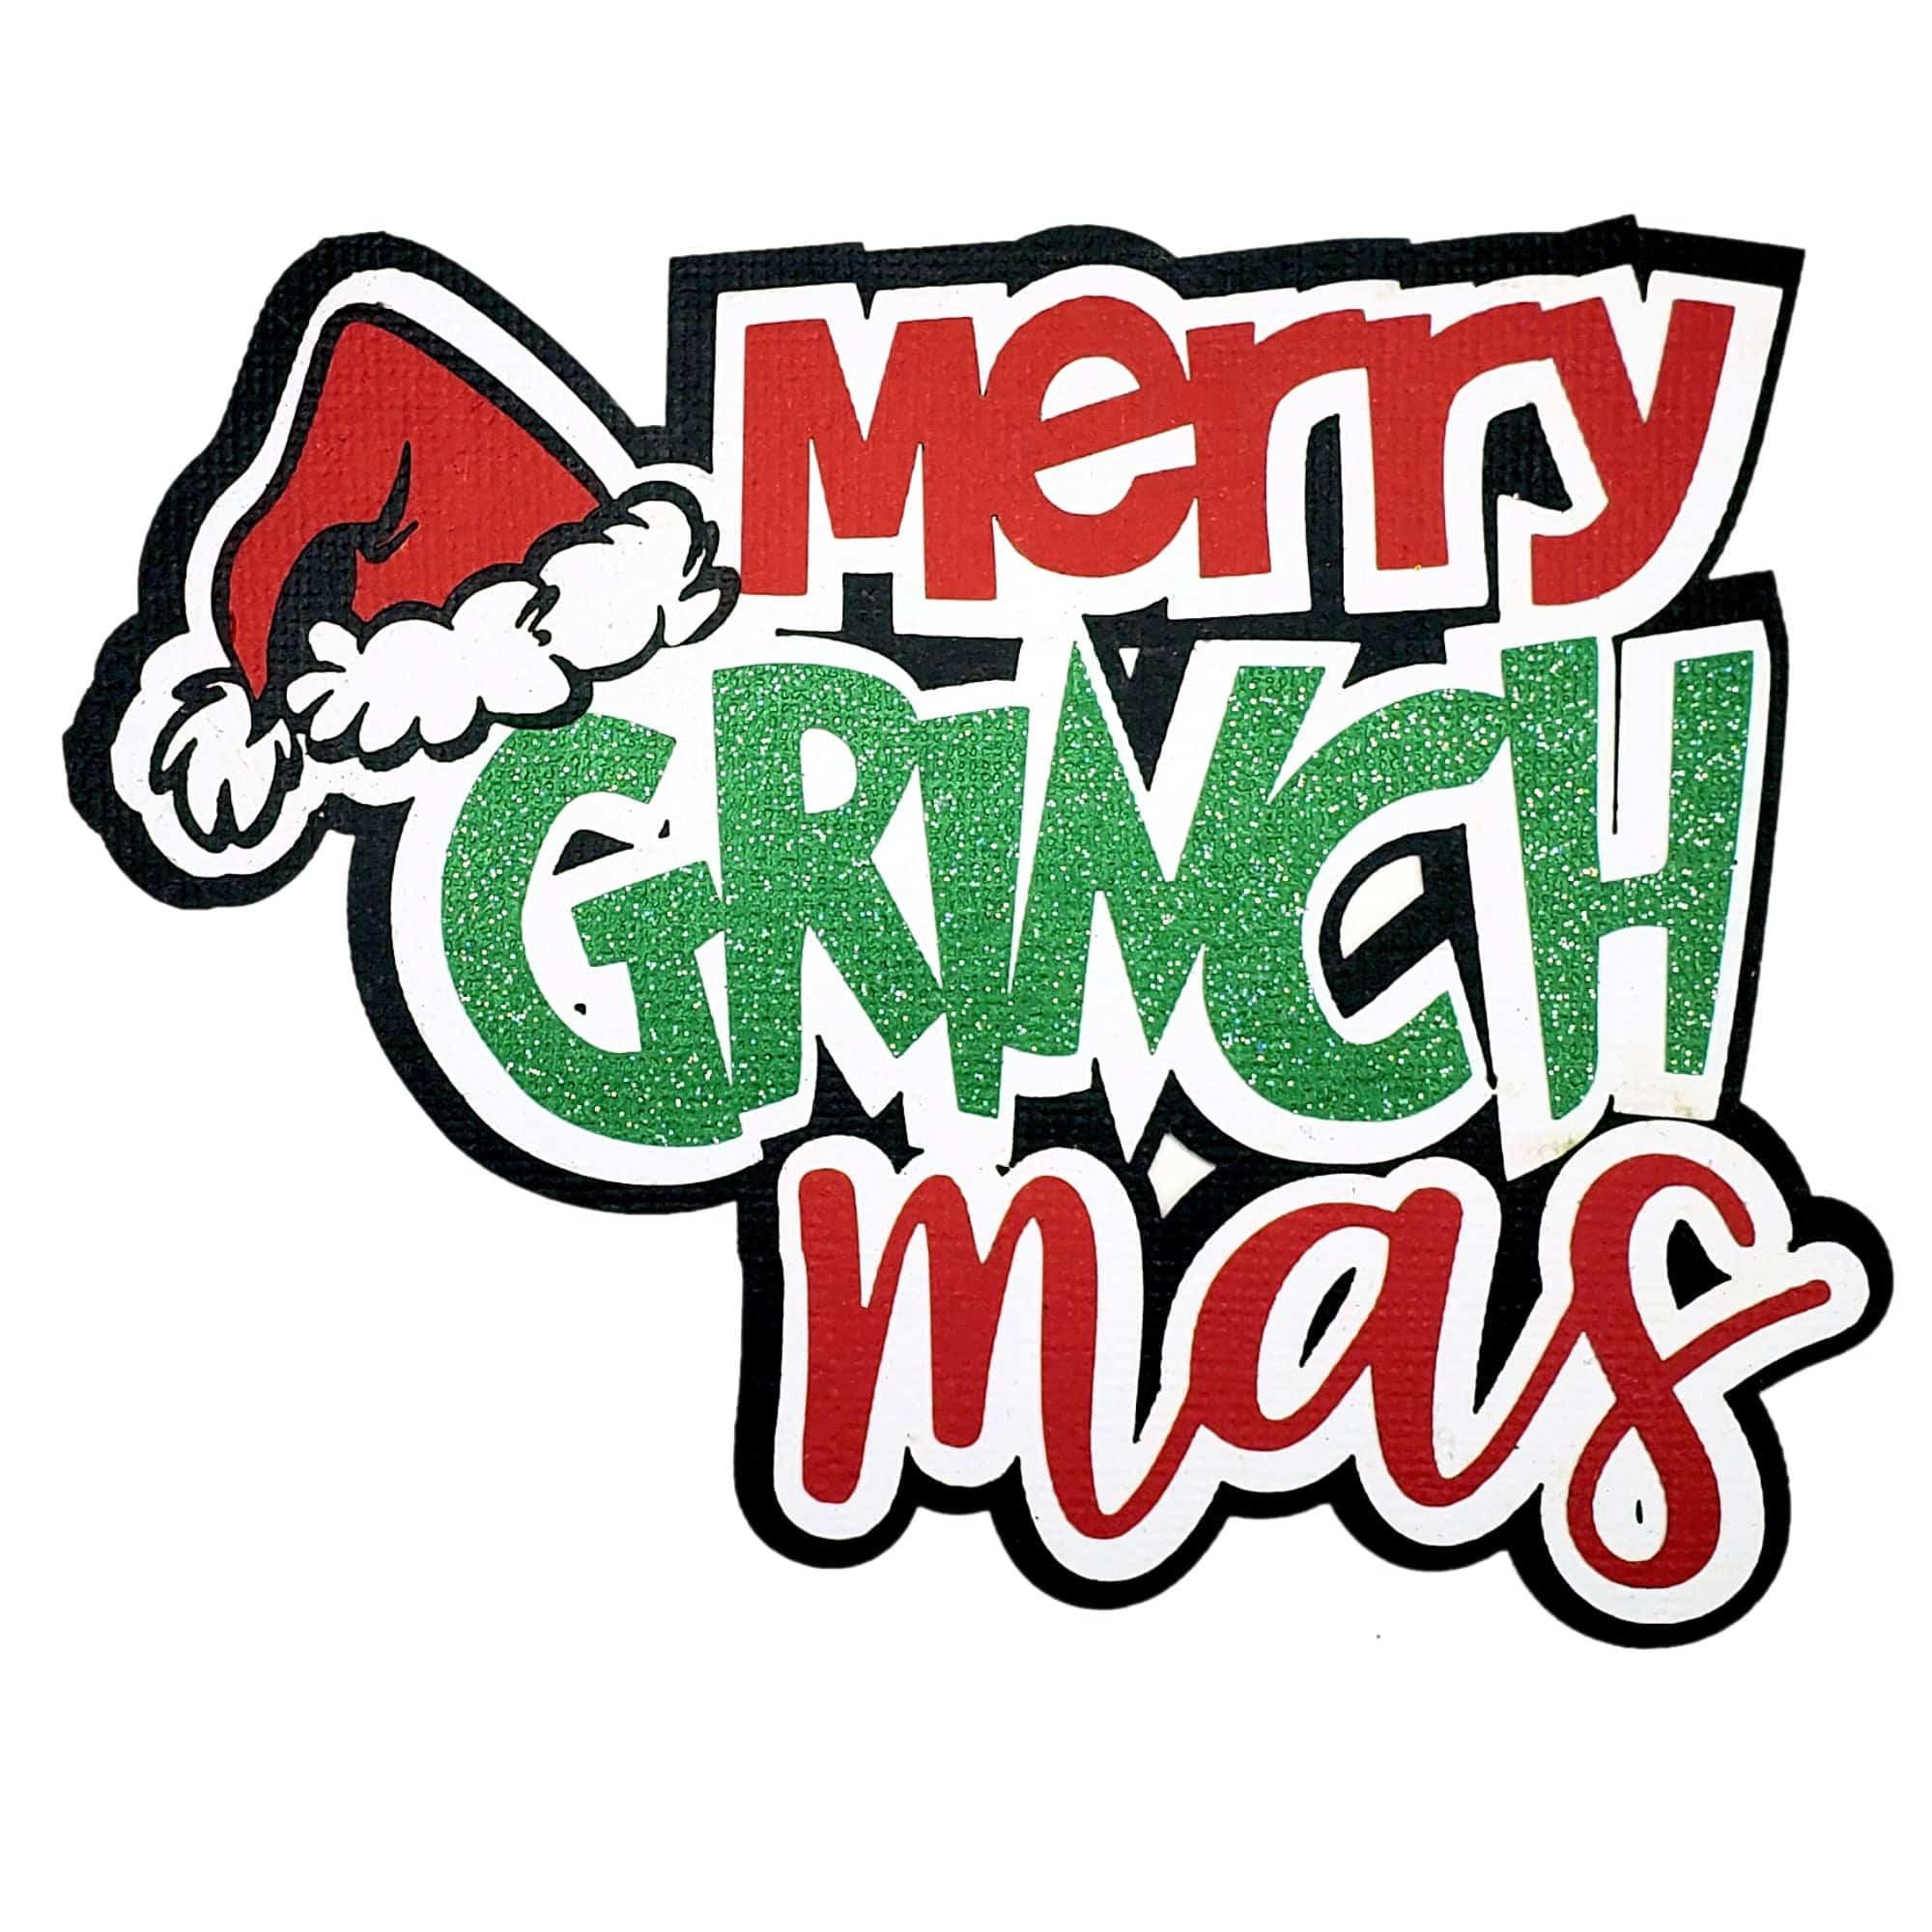 Merry Grinchmas 4 x 5 Title Fully-Assembled Laser Cut Scrapbook Embellishment by SSC Laser Designs